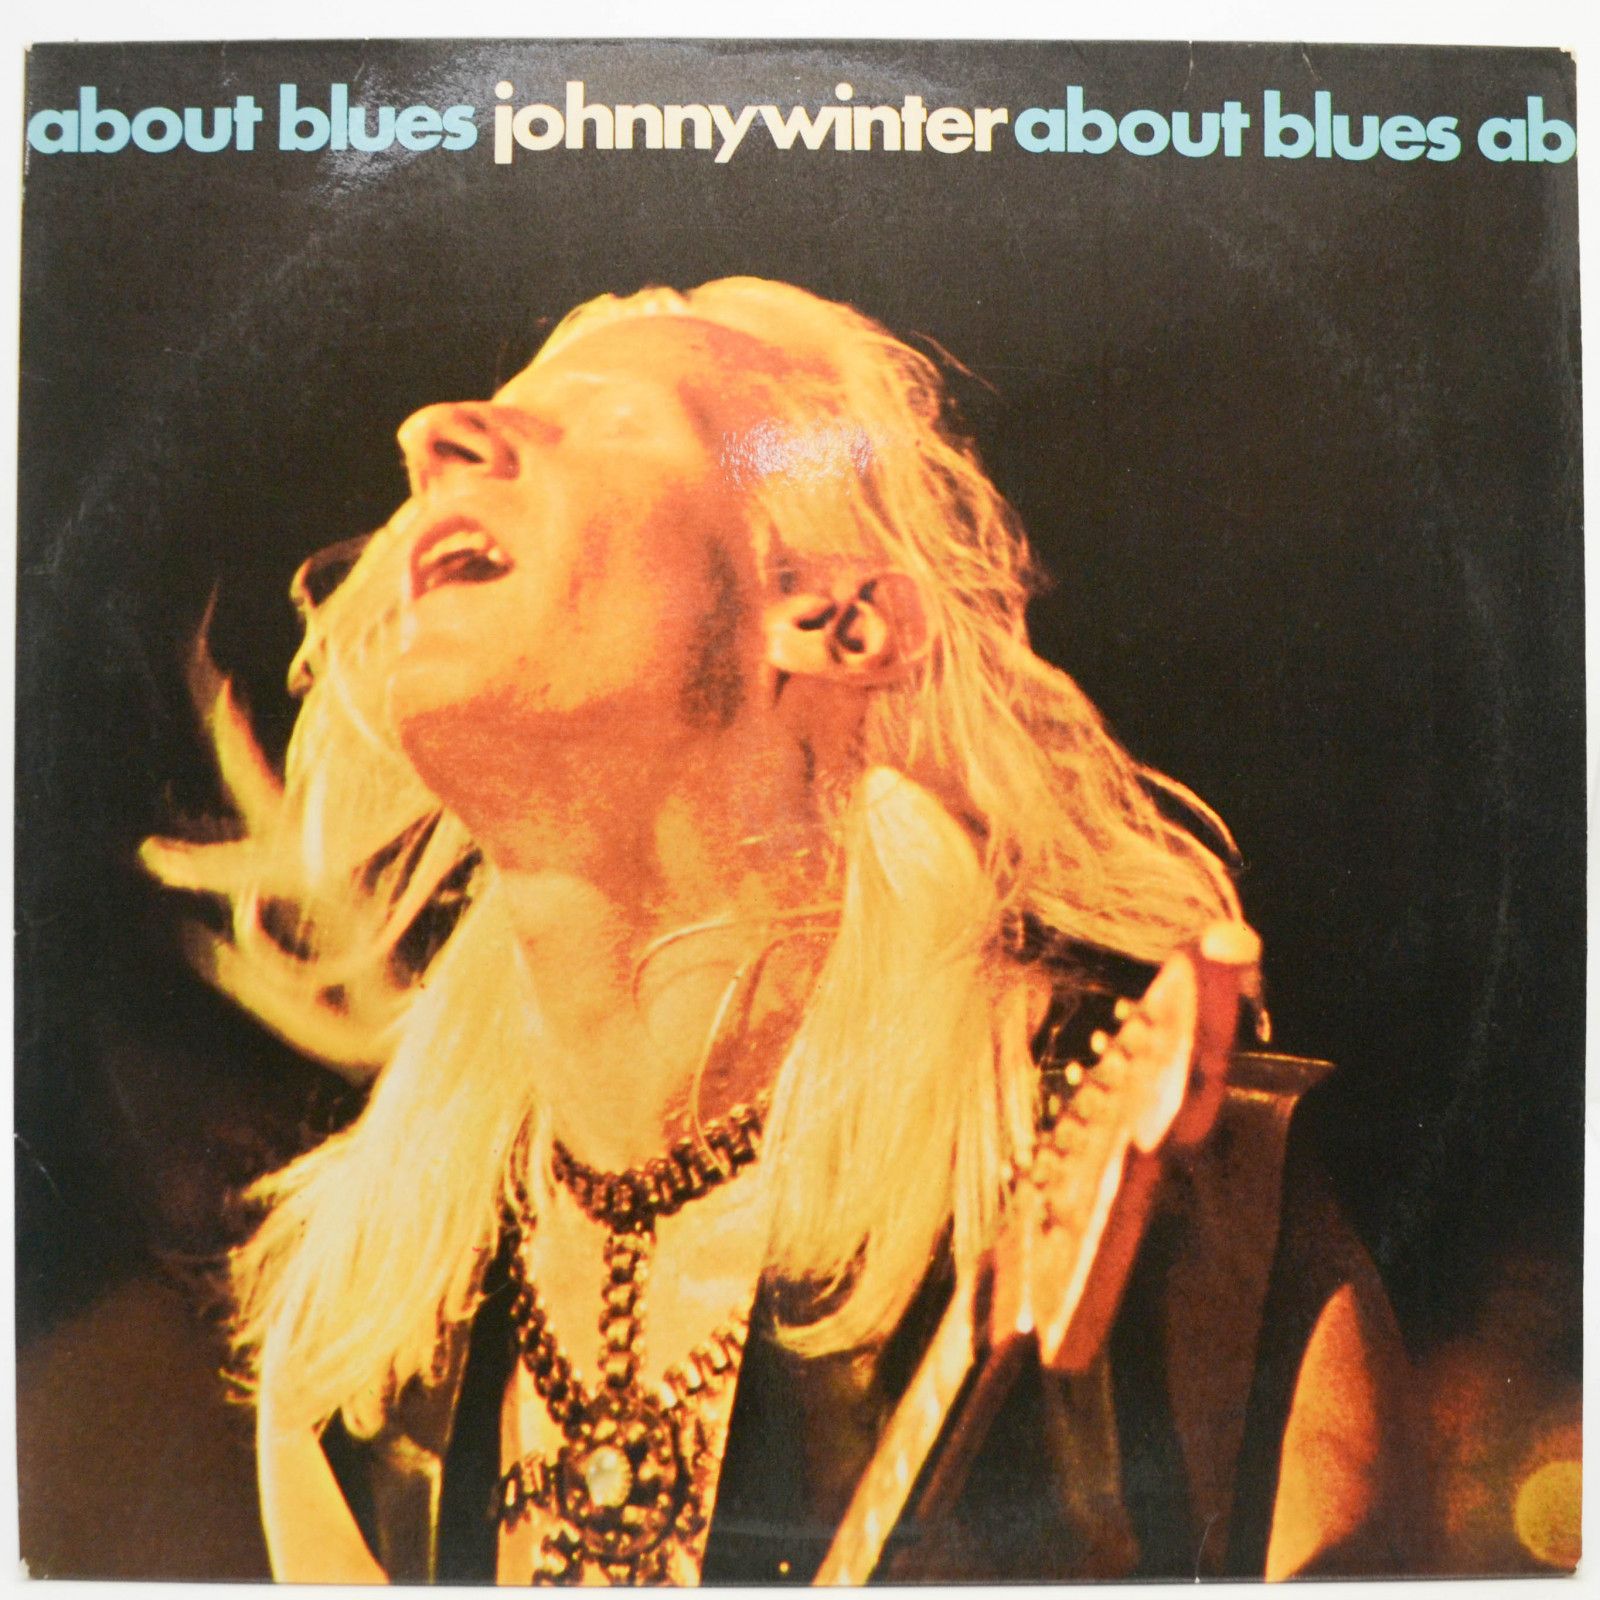 Johnny Winter — About Blues, 1969